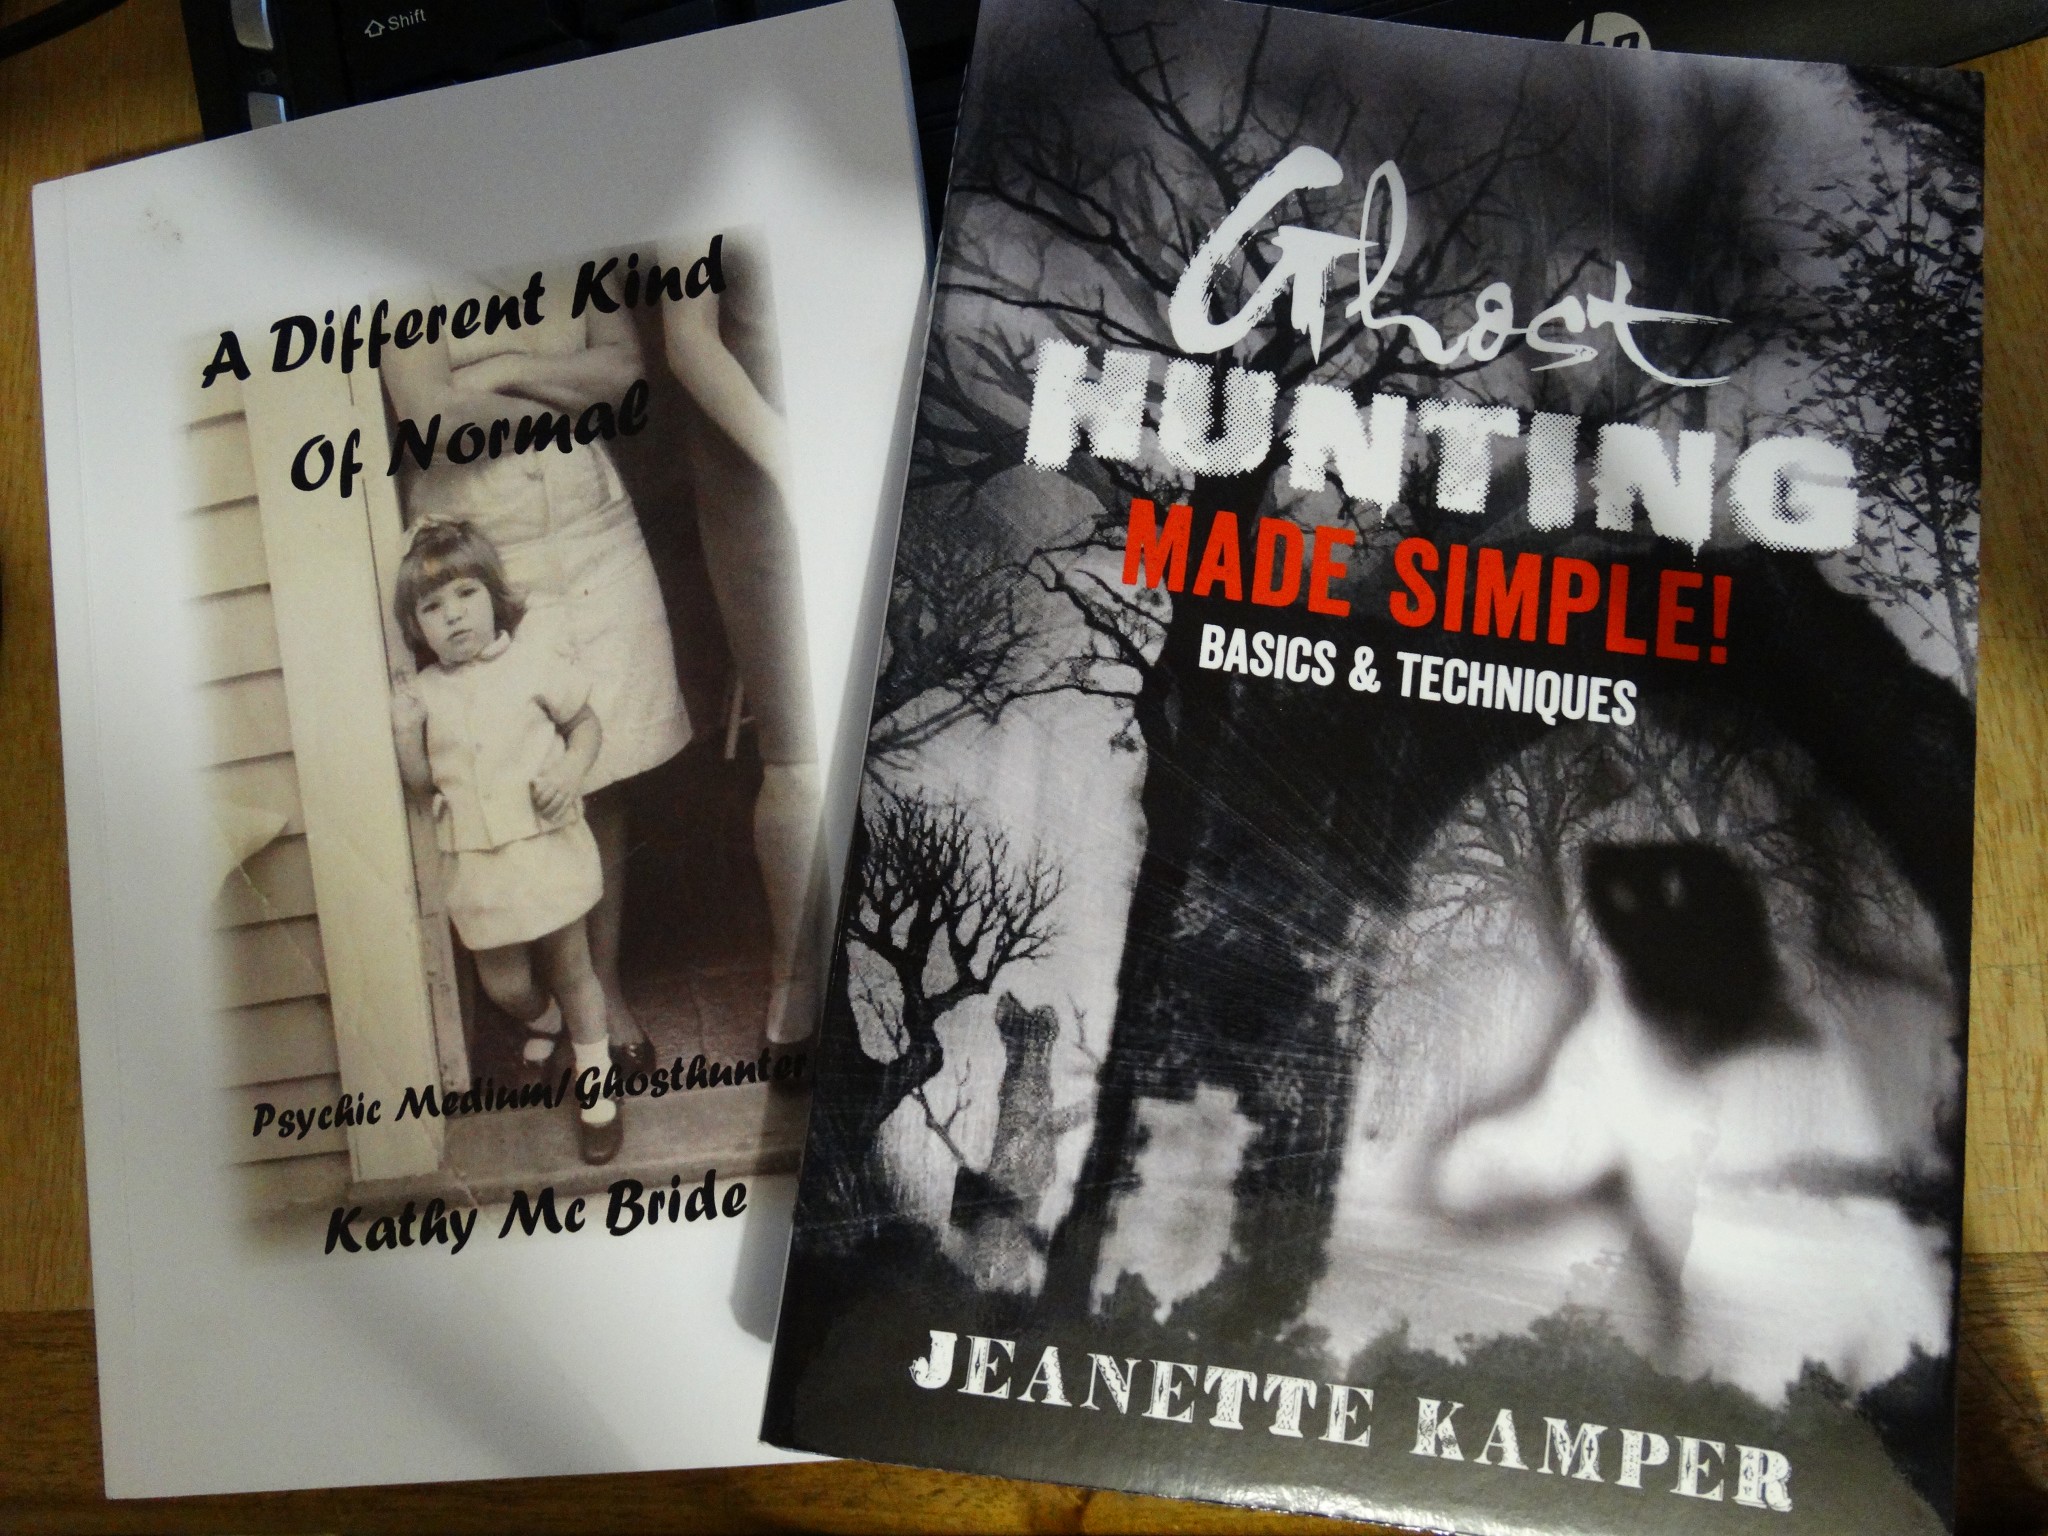 A Different Kind of Normal- by Kathy McBride   /   Ghost Hunting Made Simple – by Jeanette Kamper